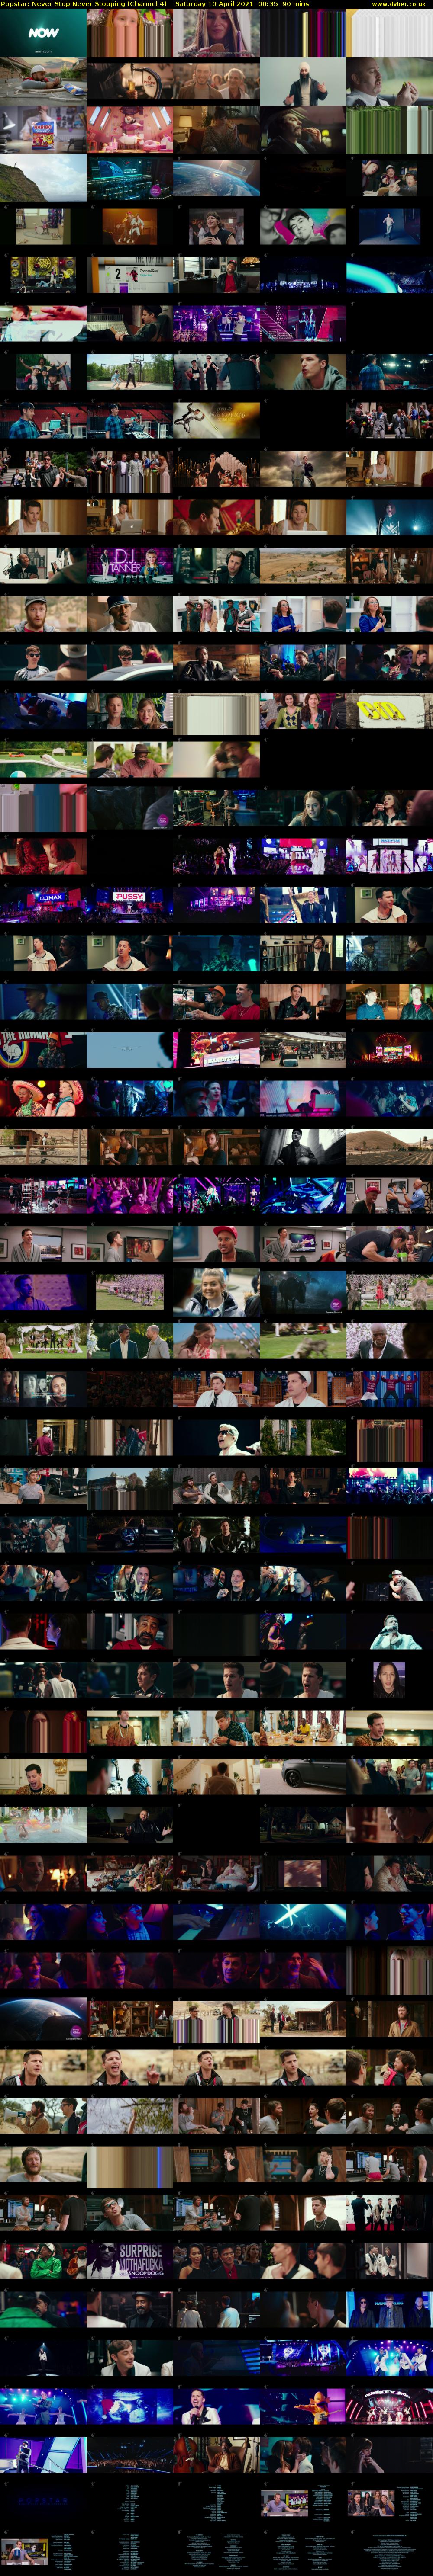 Popstar: Never Stop Never Stopping (Channel 4) Saturday 10 April 2021 00:35 - 02:05